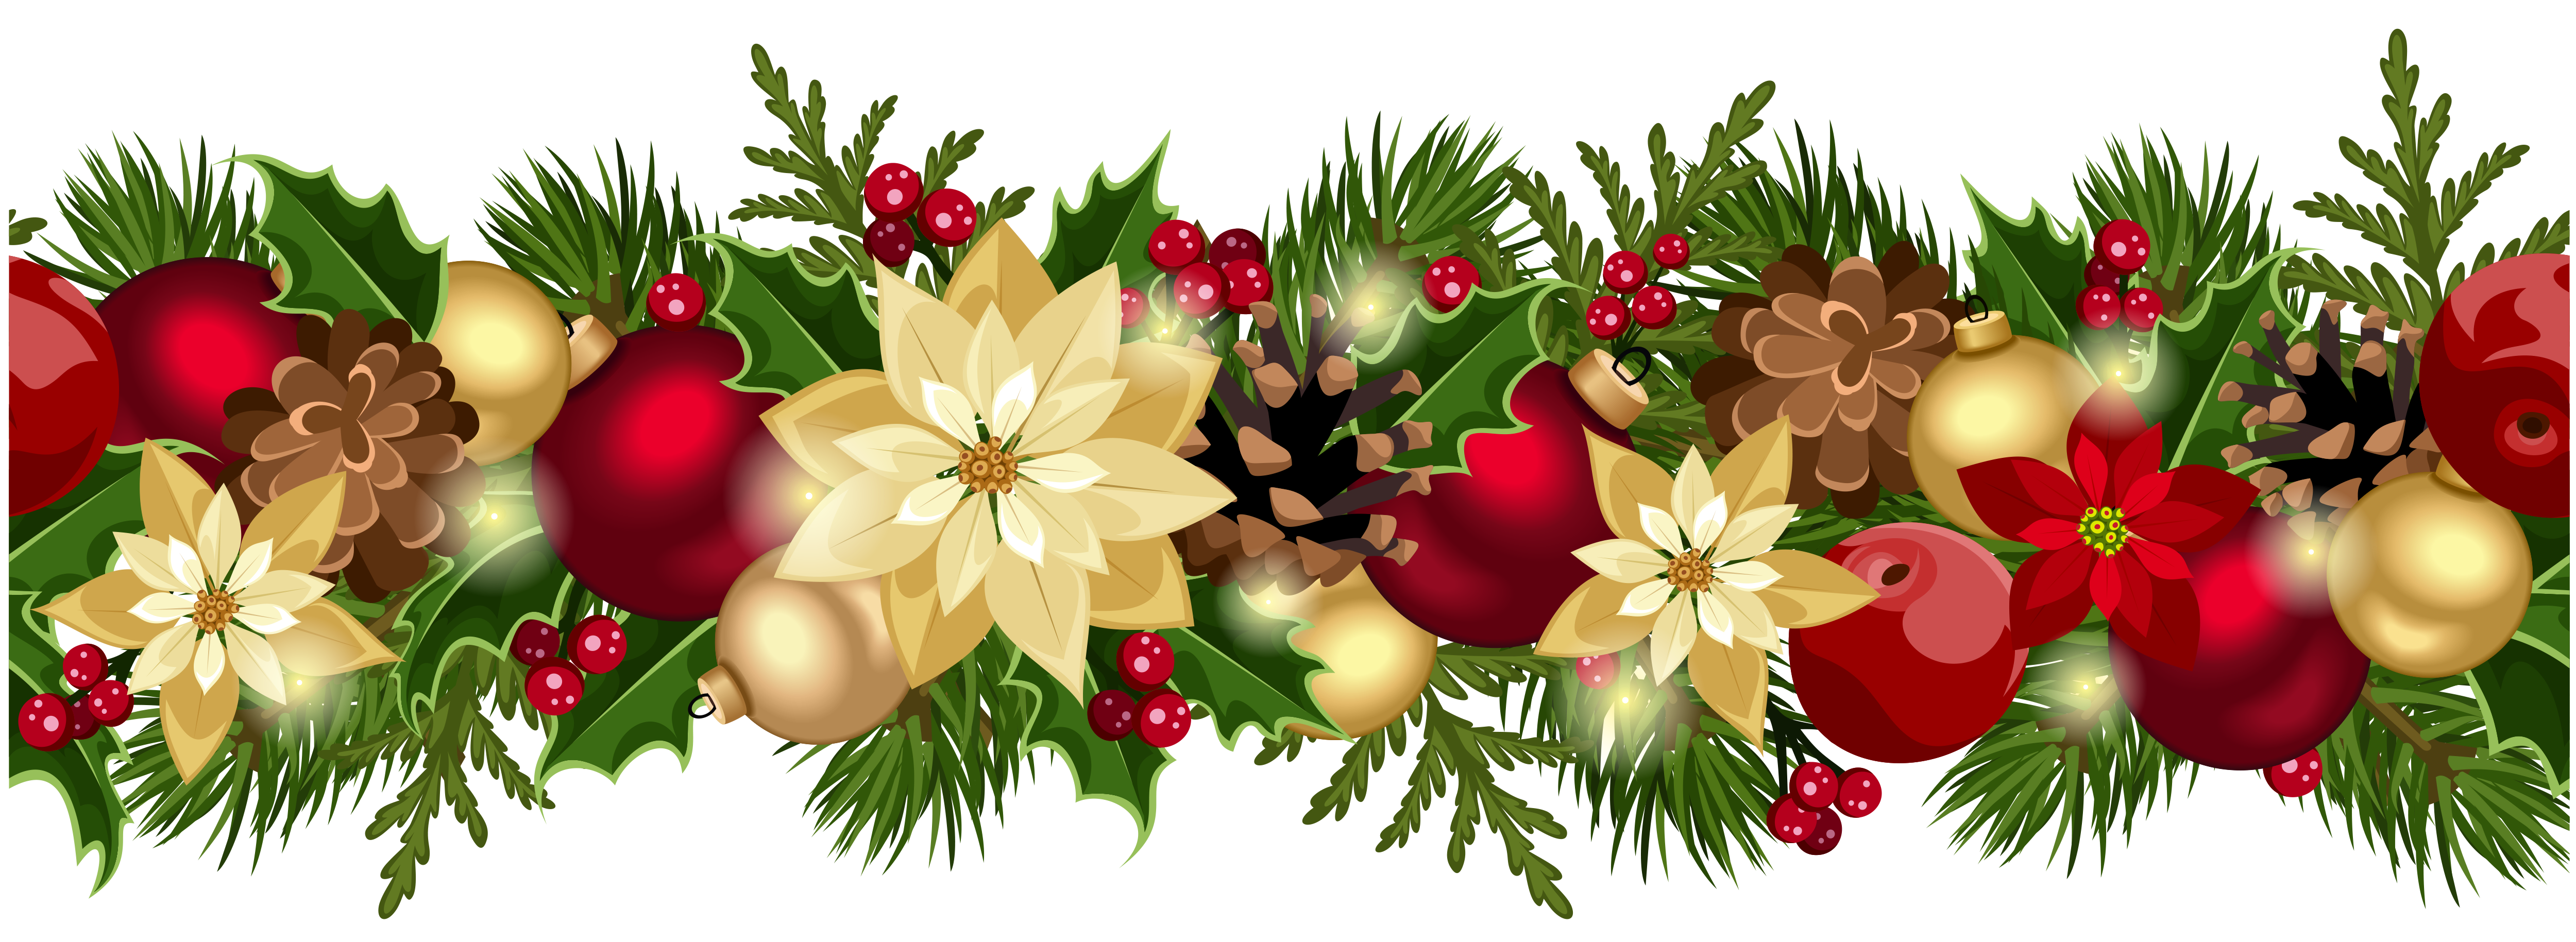 Woodland clipart garland. Holiday crafthubs background cover